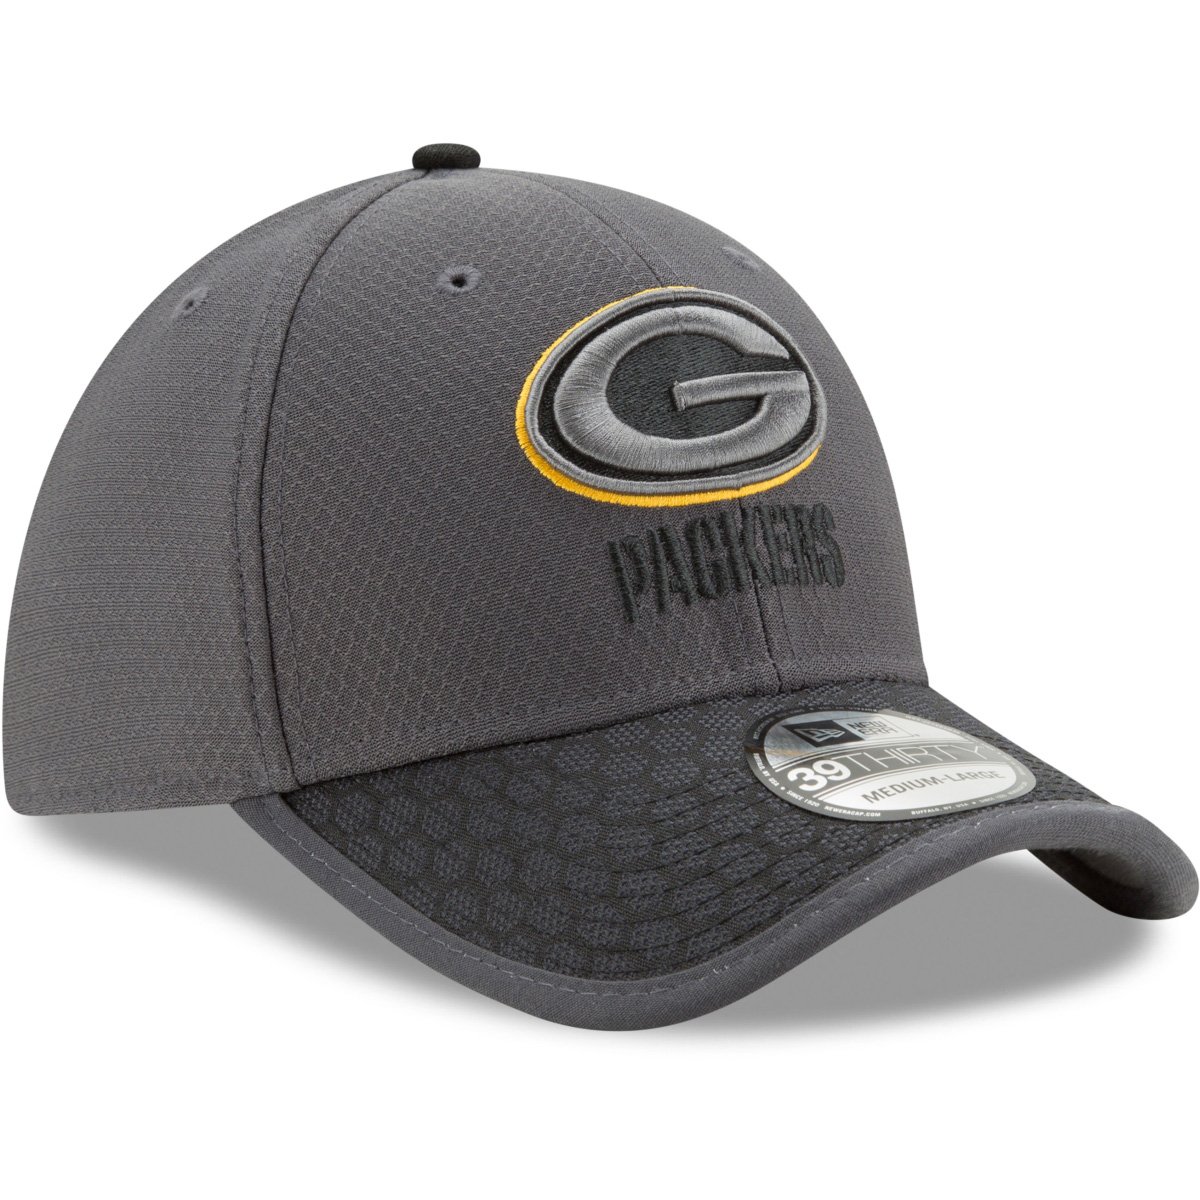 New Era 39Thirty Cap - NFL 2017 SIDELINE Green Bay Packers | Stretch ...